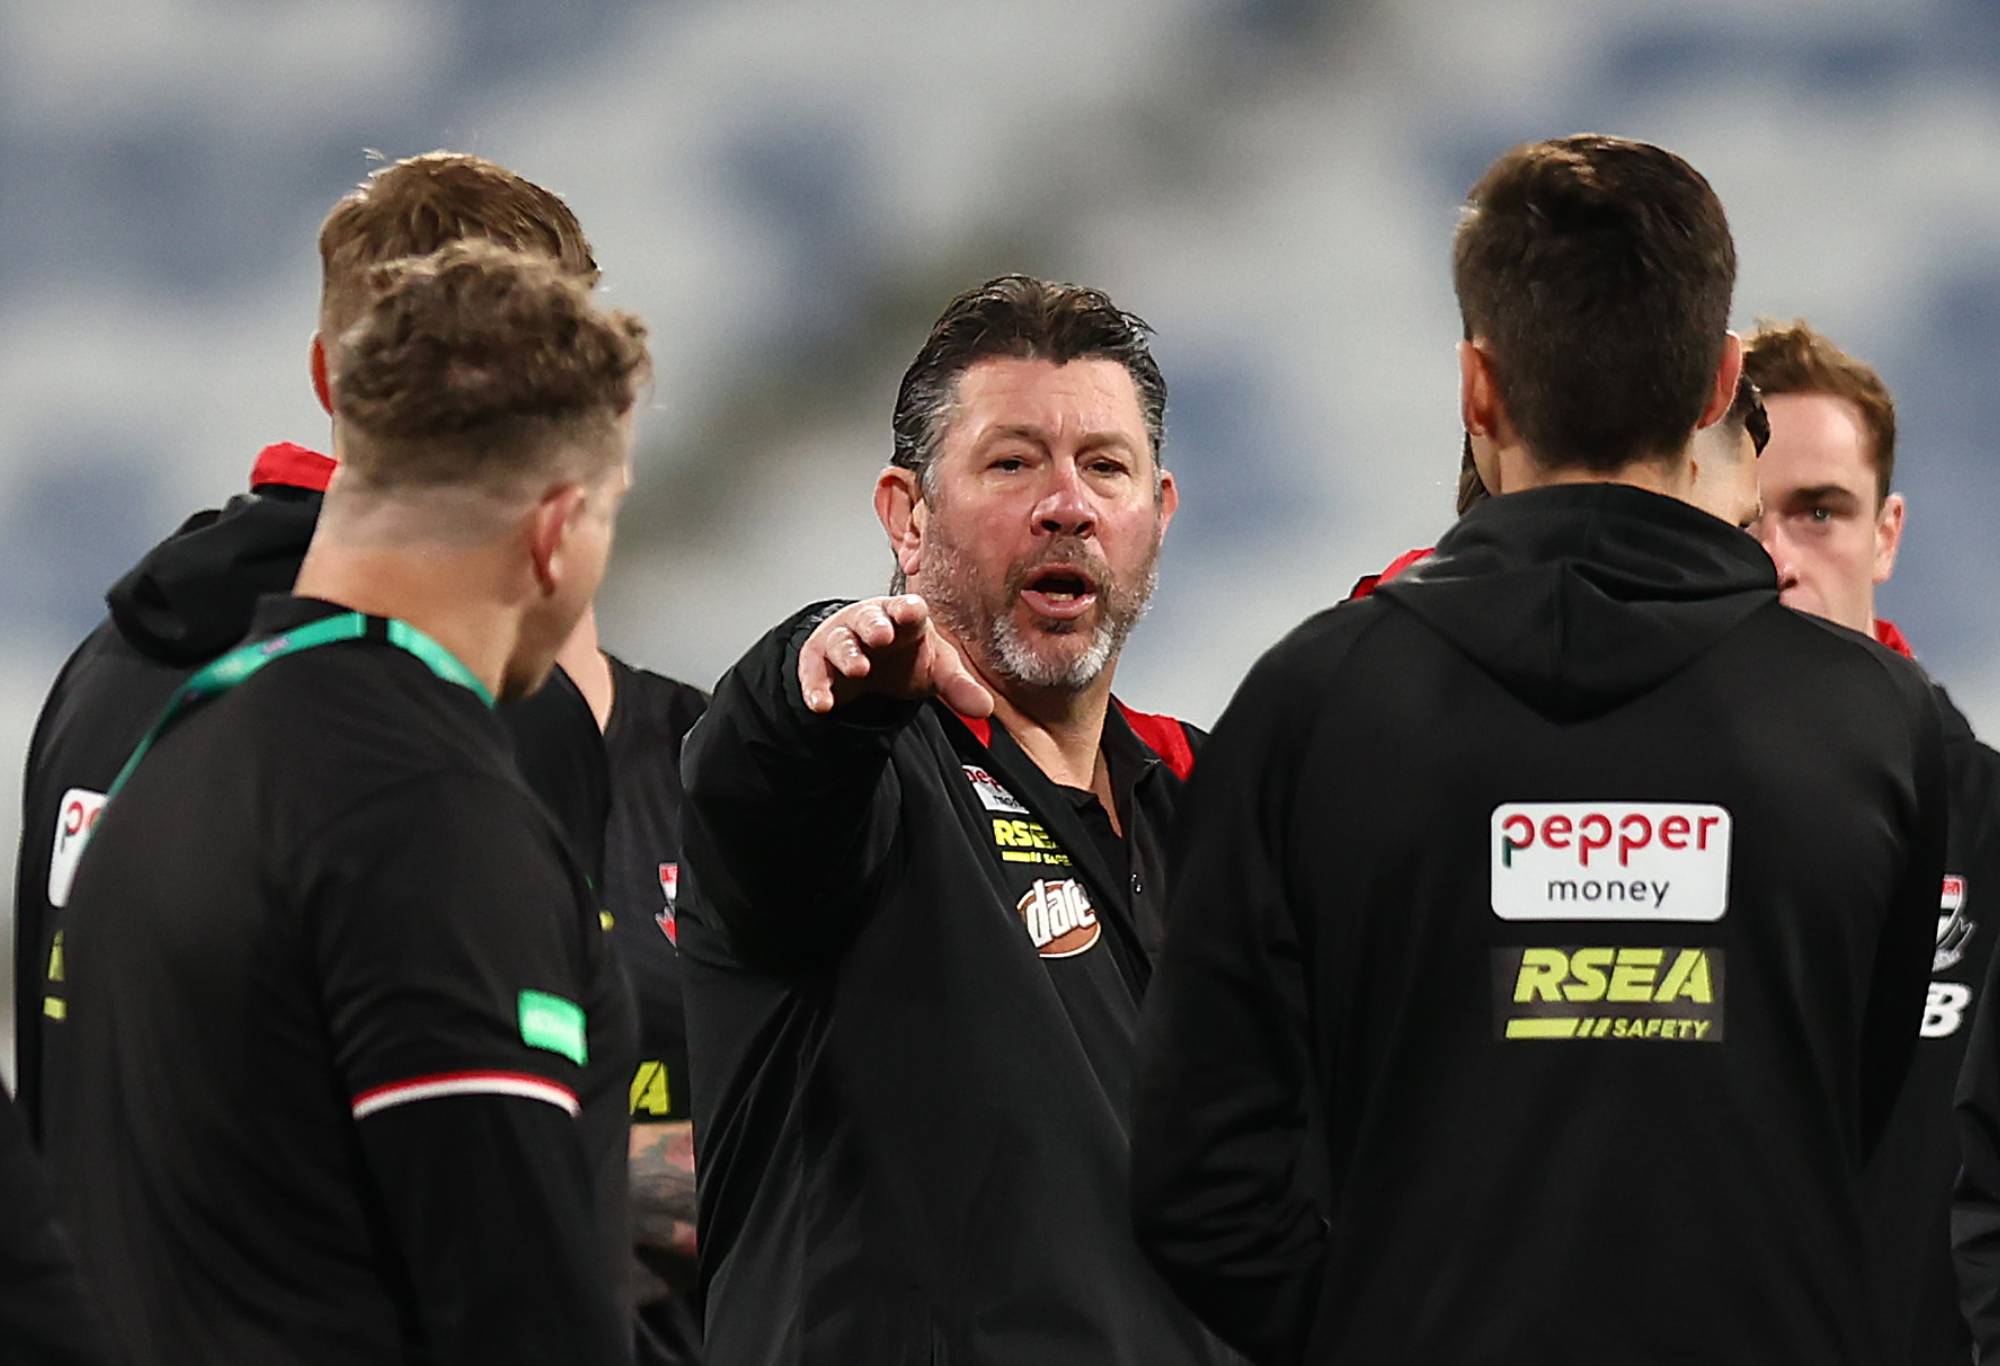 St Kilda Saints Senior Coach Brett Ratten talks to his players prior to the round 21 AFL match between the Geelong Cats and the St Kilda Saints at GMHBA Stadium on August 06, 2022 in Geelong, Australia. (Photo by Graham Denholm/AFL Photos via Getty Images )